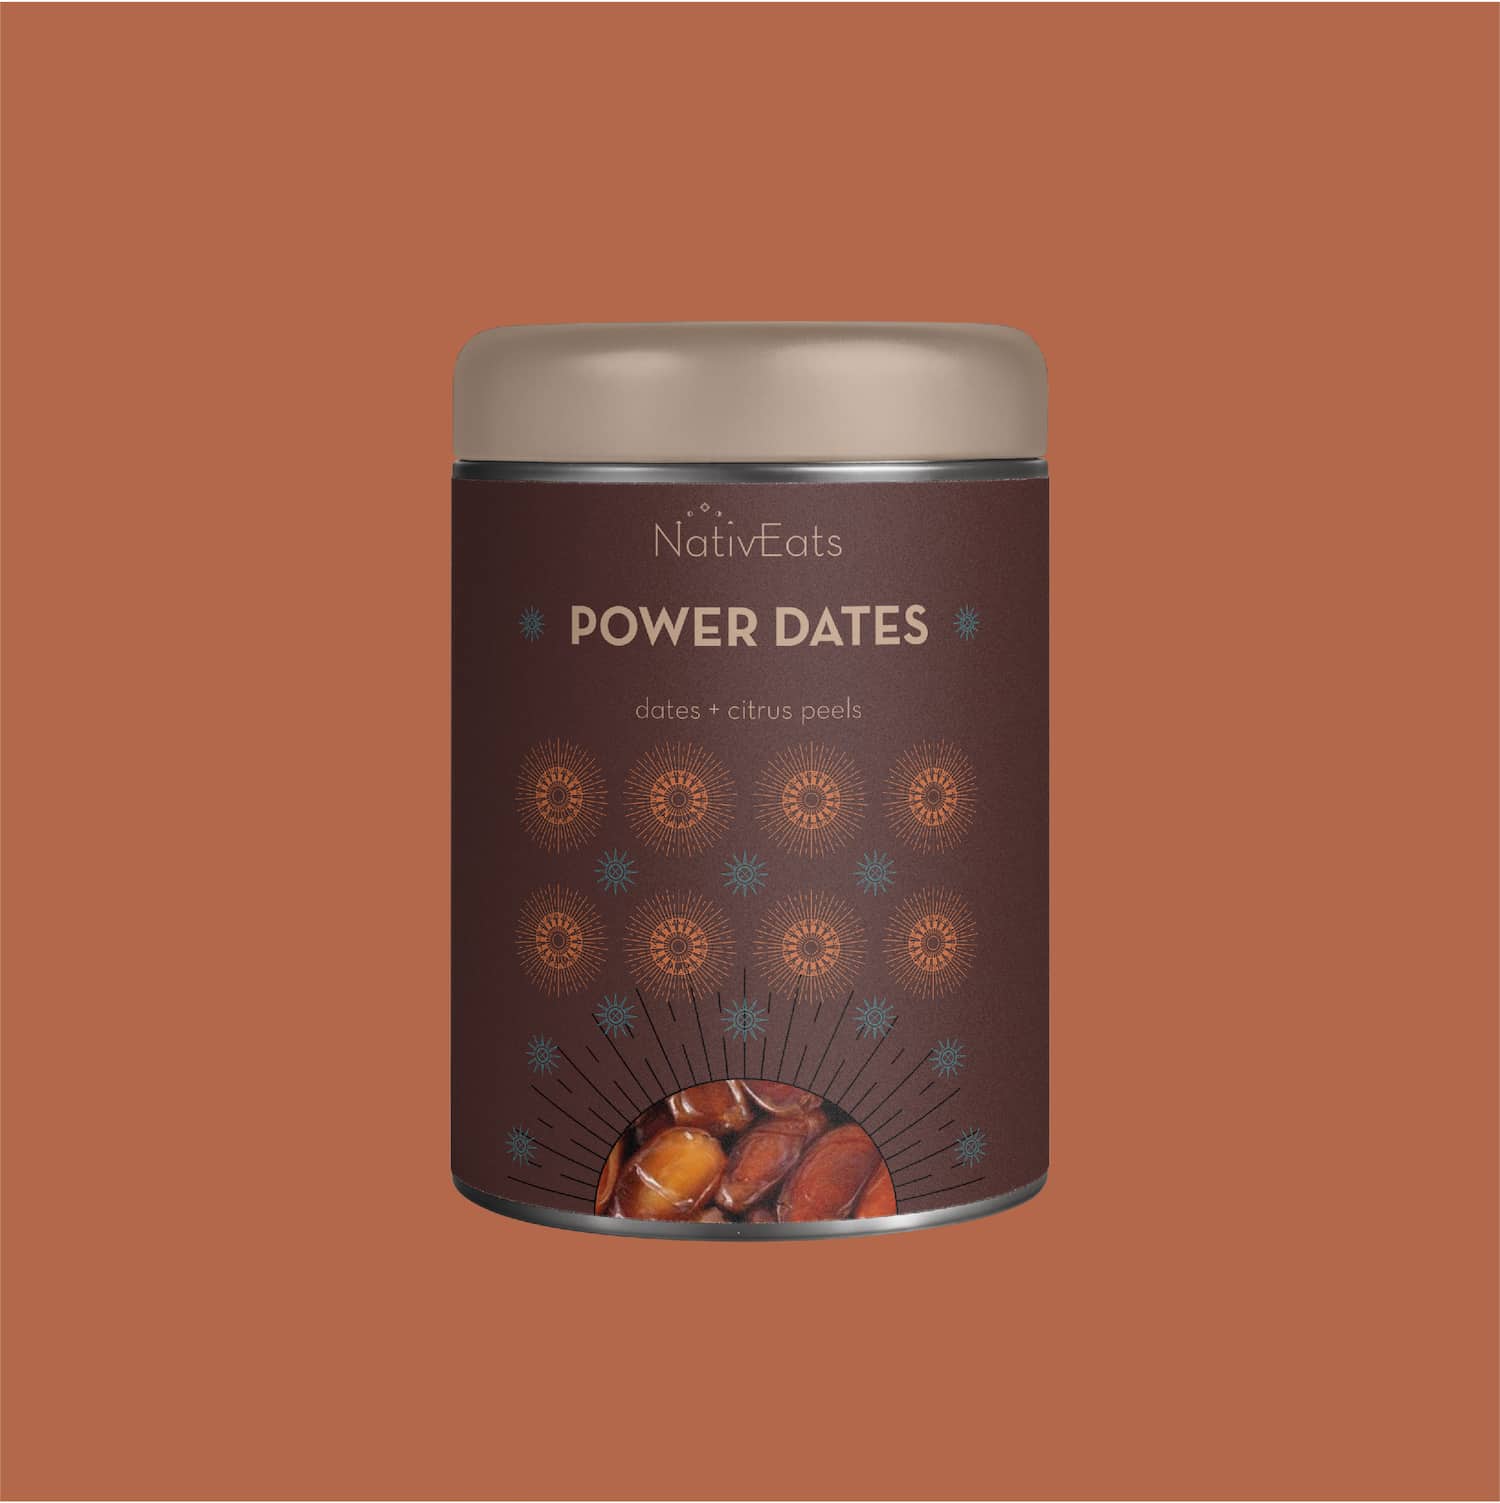 Dates packaging with graphic design in a tin round box